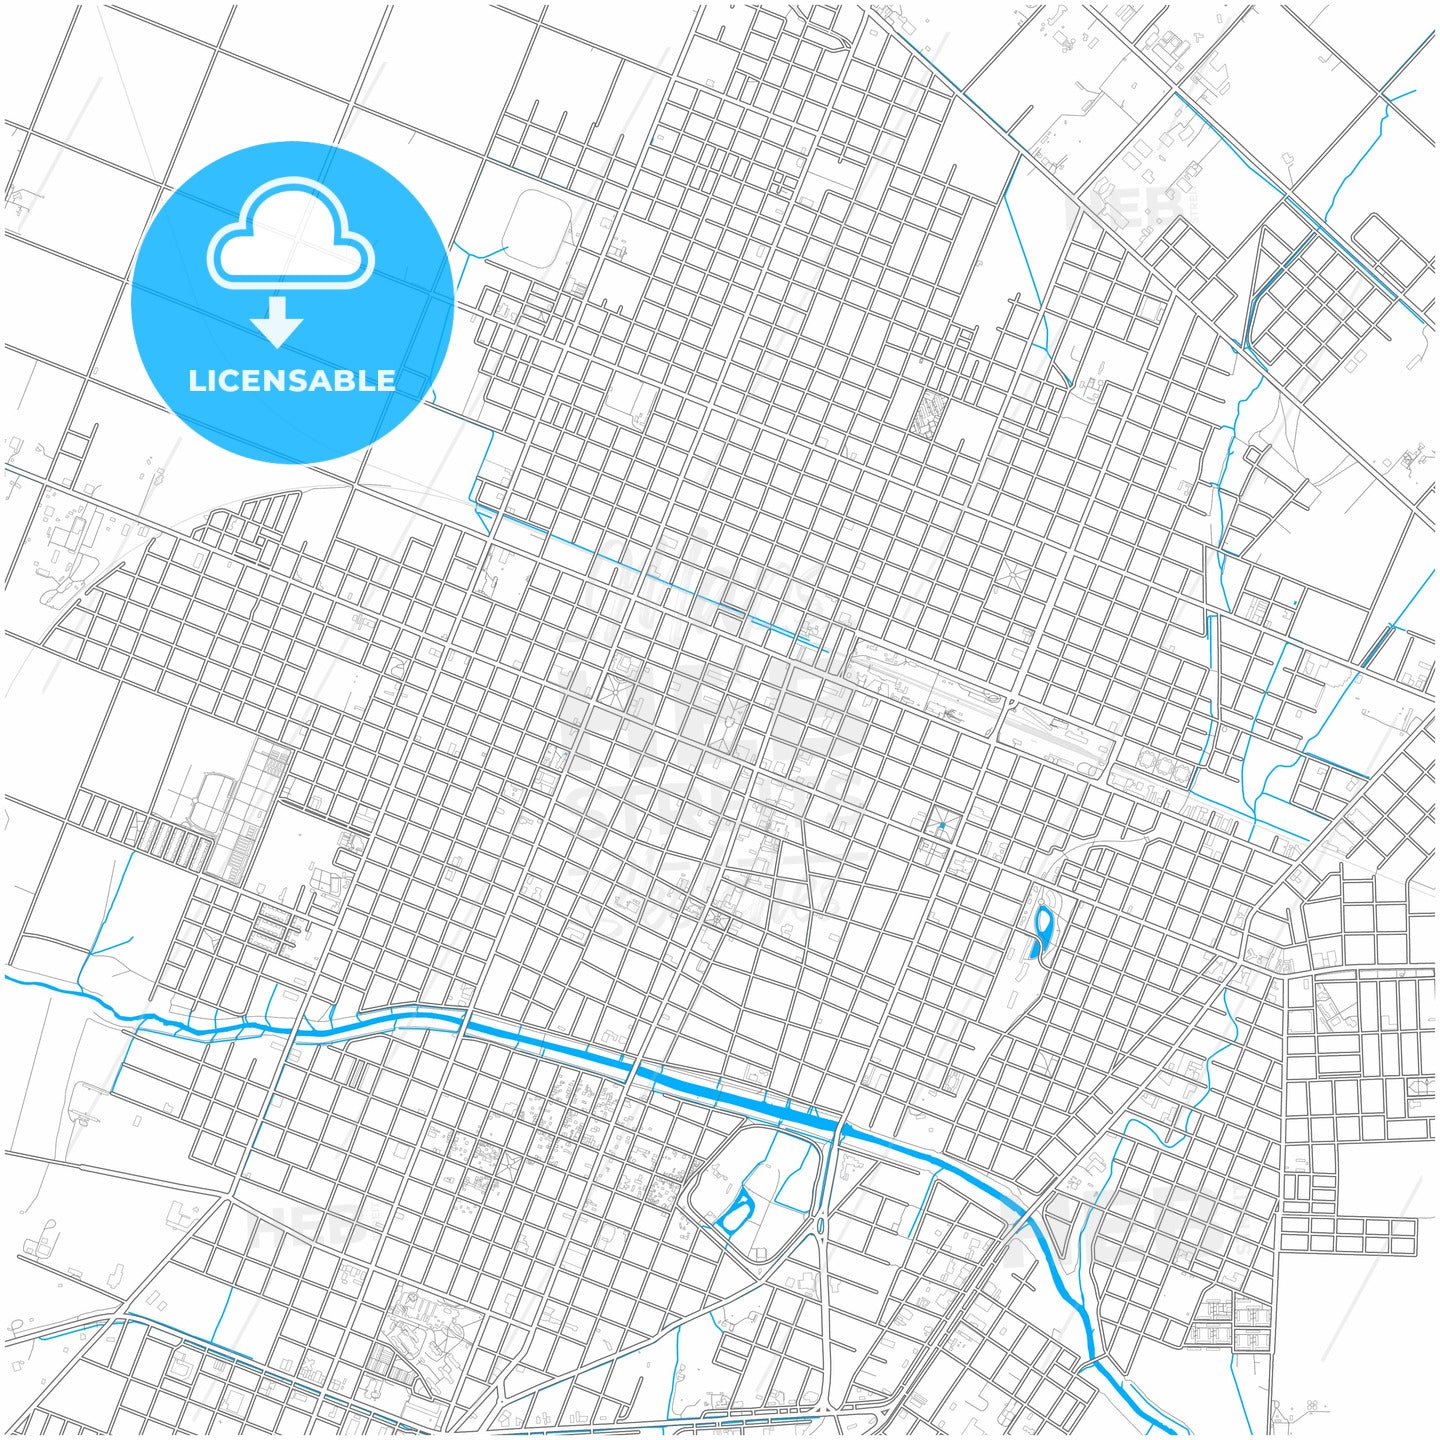 Pergamino, Argentina, city map with high quality roads.